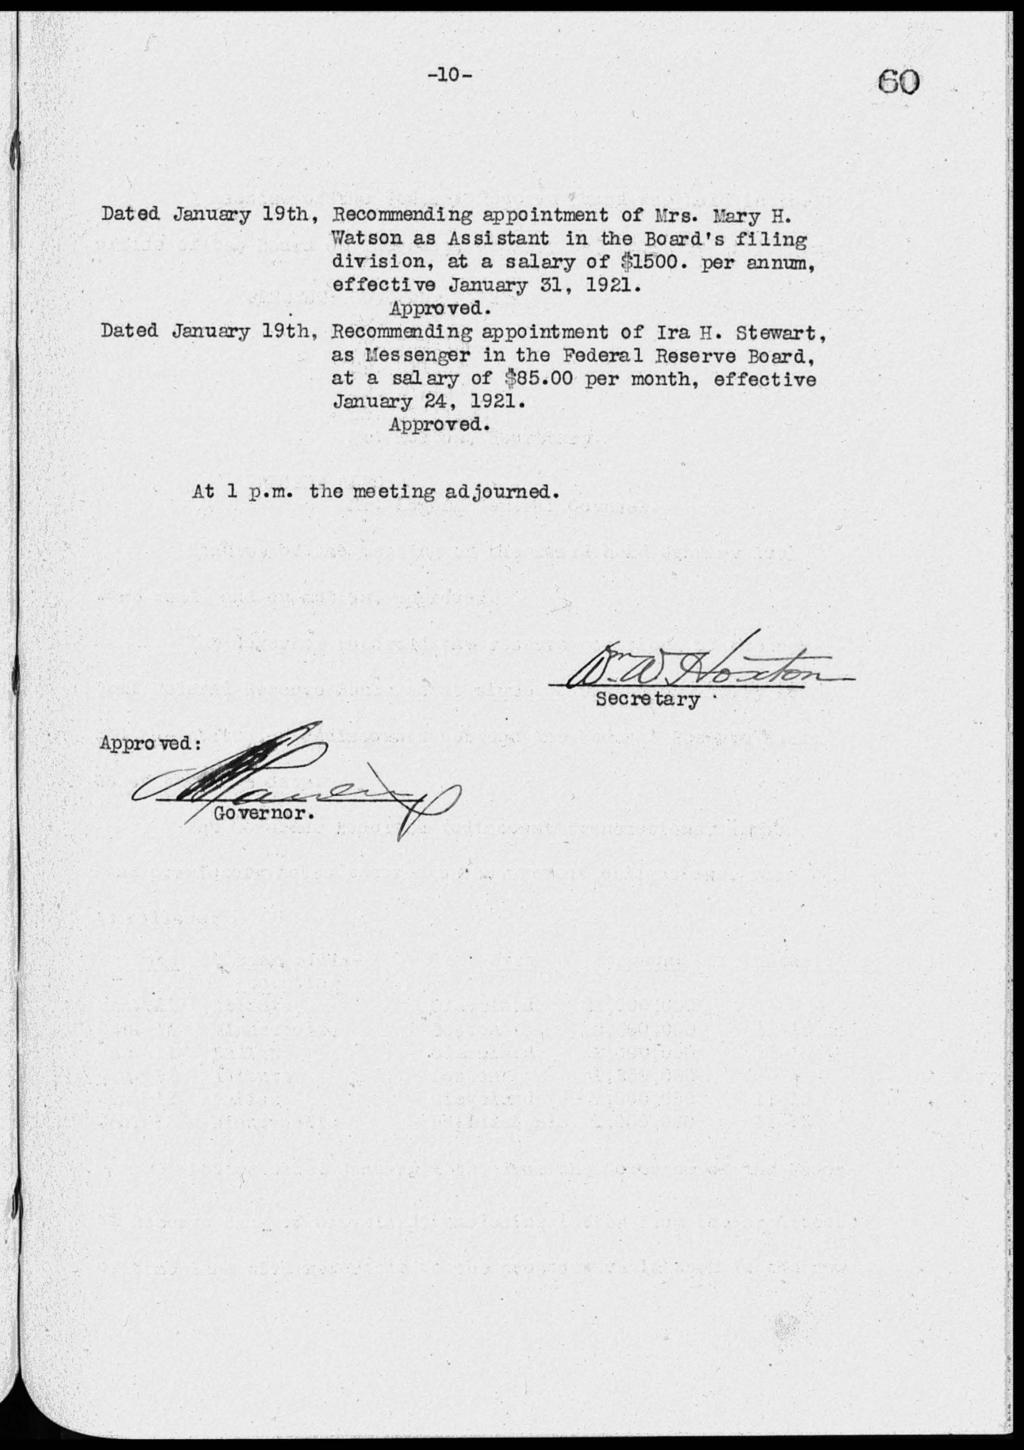 Dated January 19th, Recommending appointment of :7rs. Lary H. Watson as Assistant in the Board's filing division, at a salary of.,1500. per annum, effective January 31, 1921.